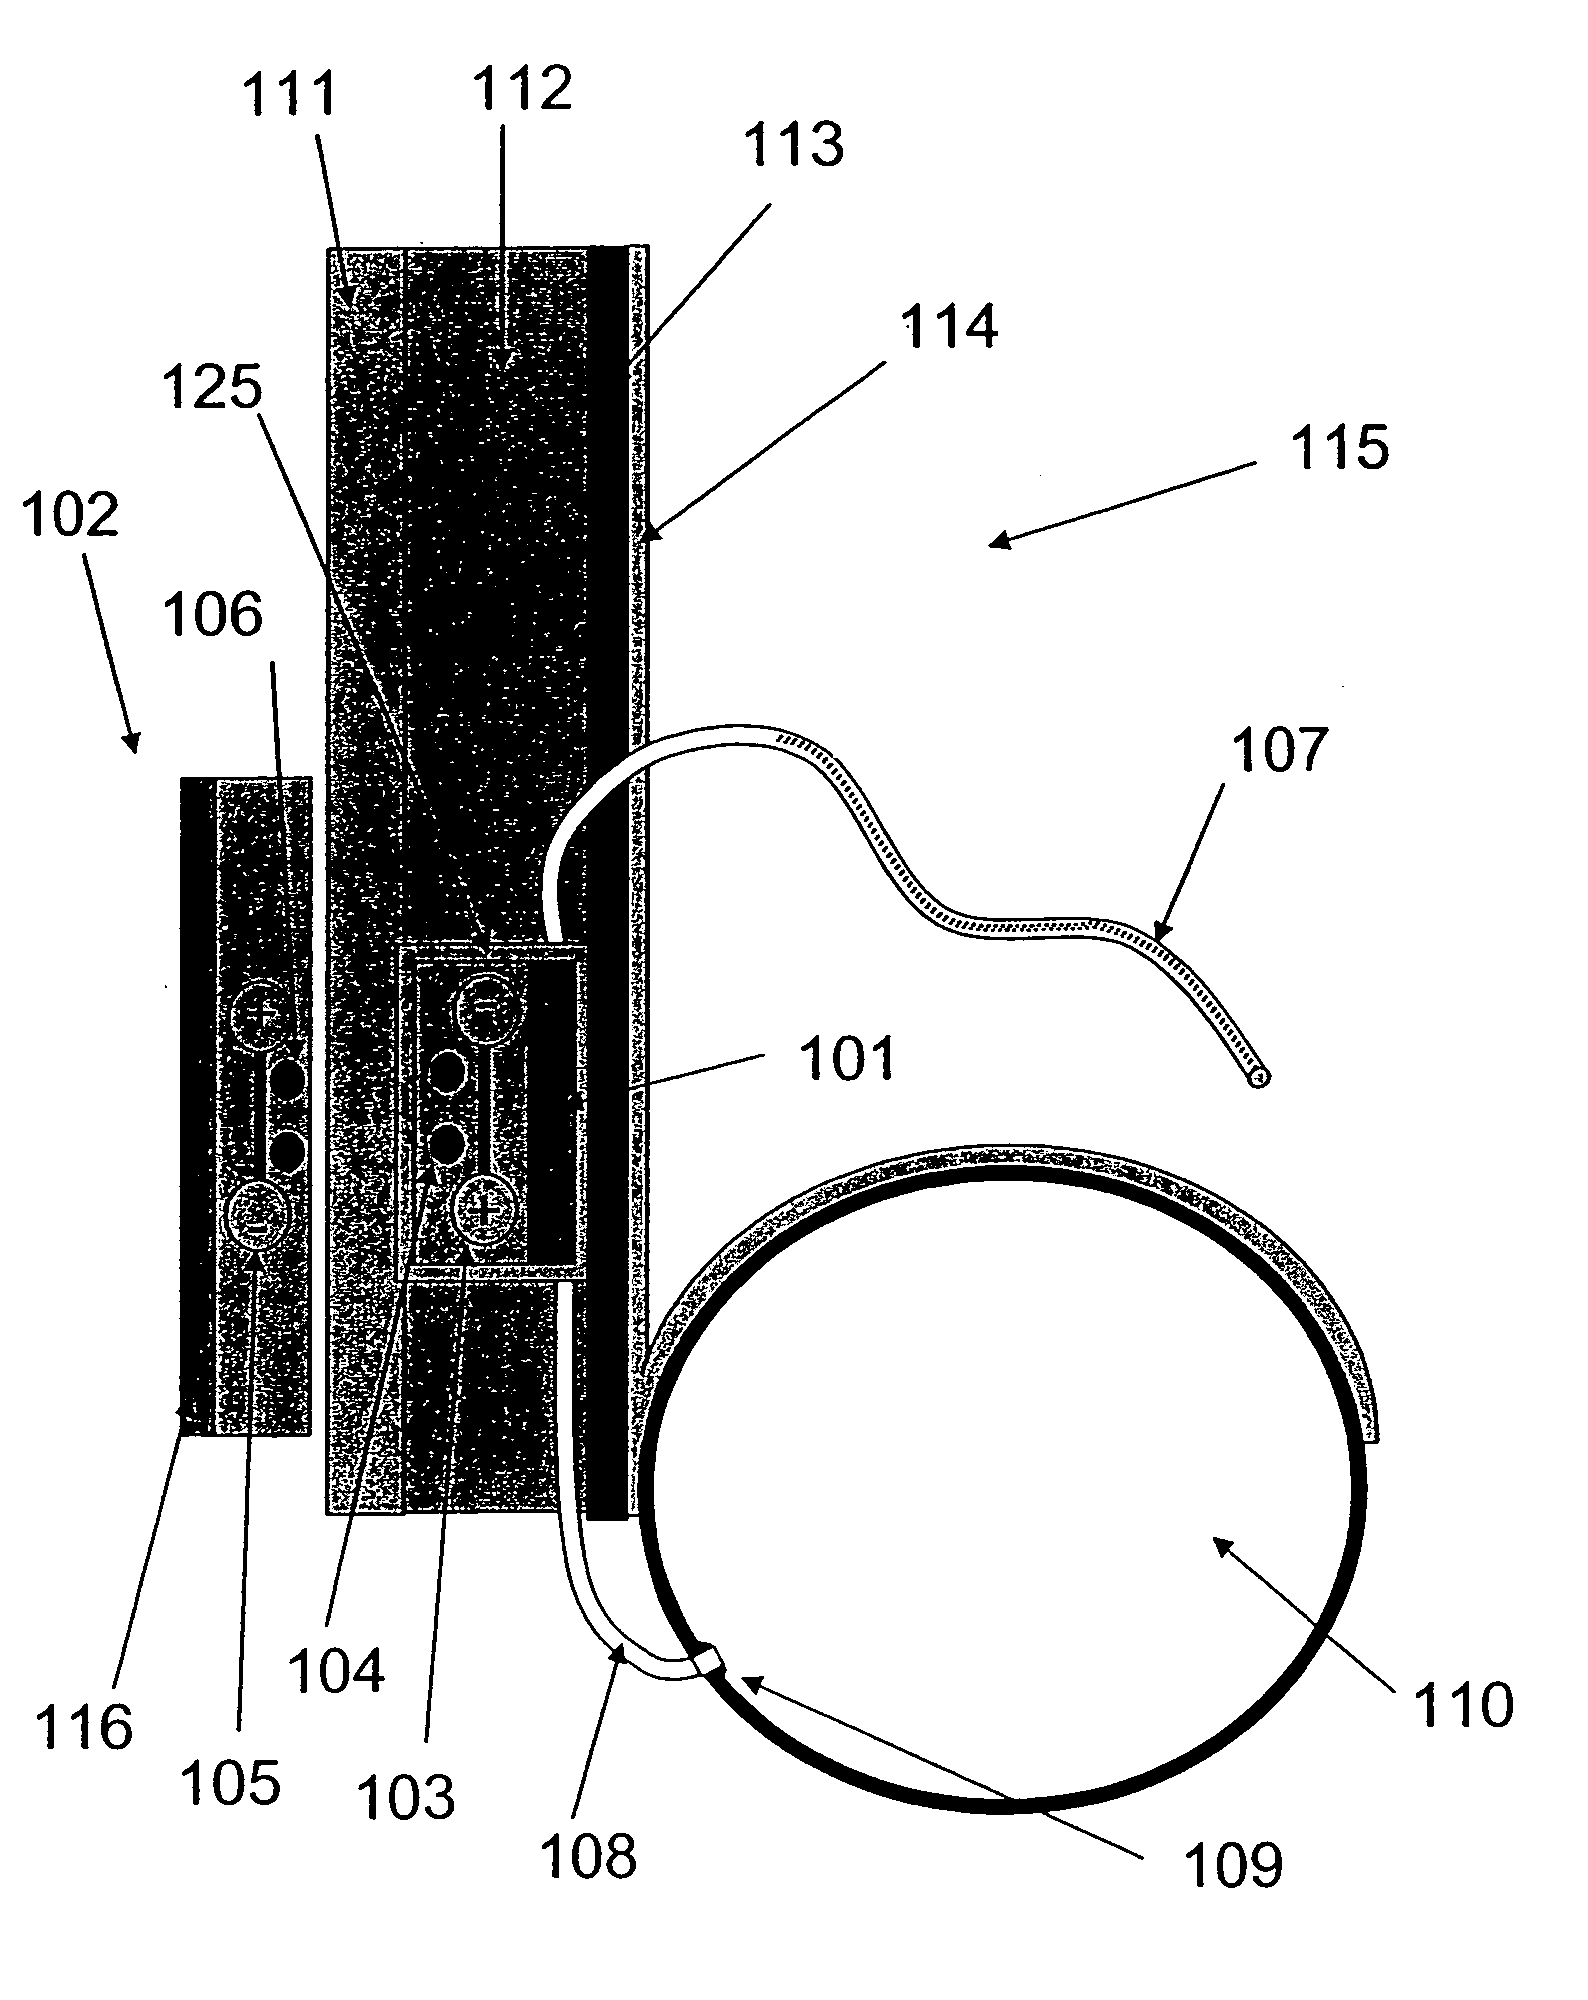 Implantable fluid management system for the removal of excess fluid